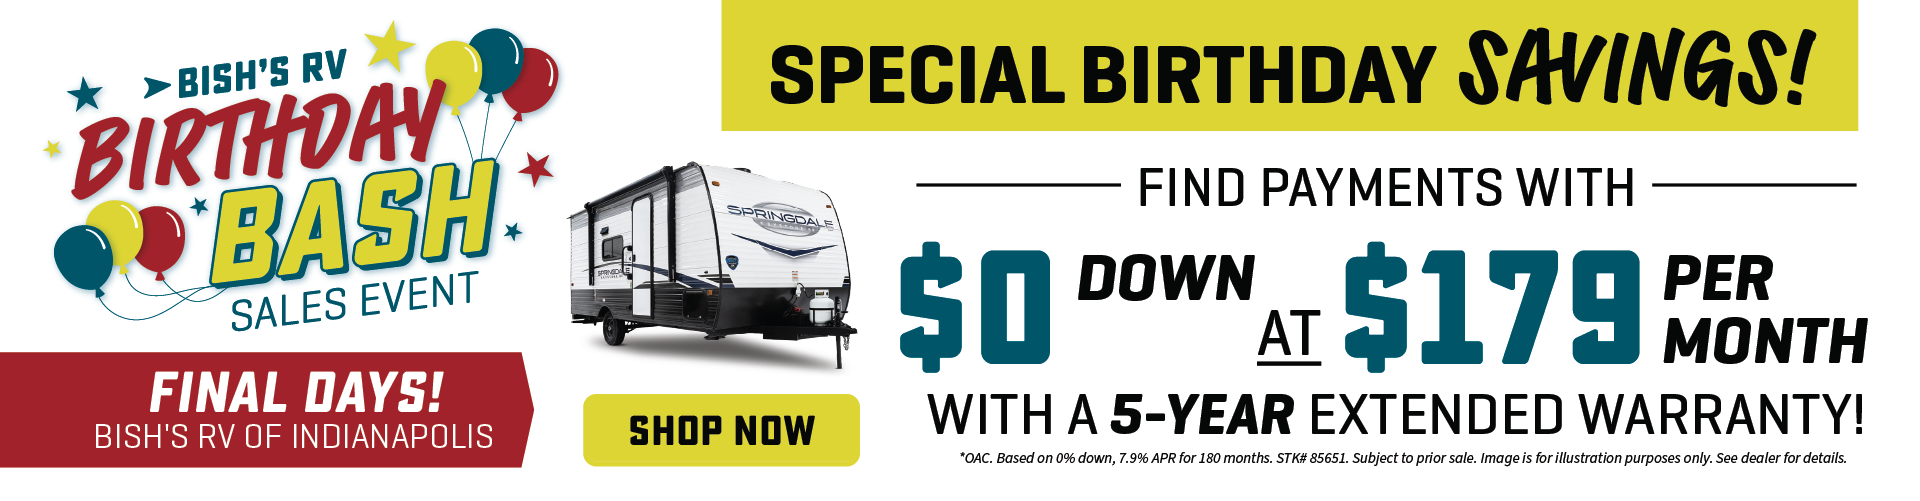 Payments starting at $179 per month with $0 down OAC with a 5-year extended warranty - Birthday Bash Sales Event - FINAL DAYS - Bish's RV of Indianapolis in Anderson